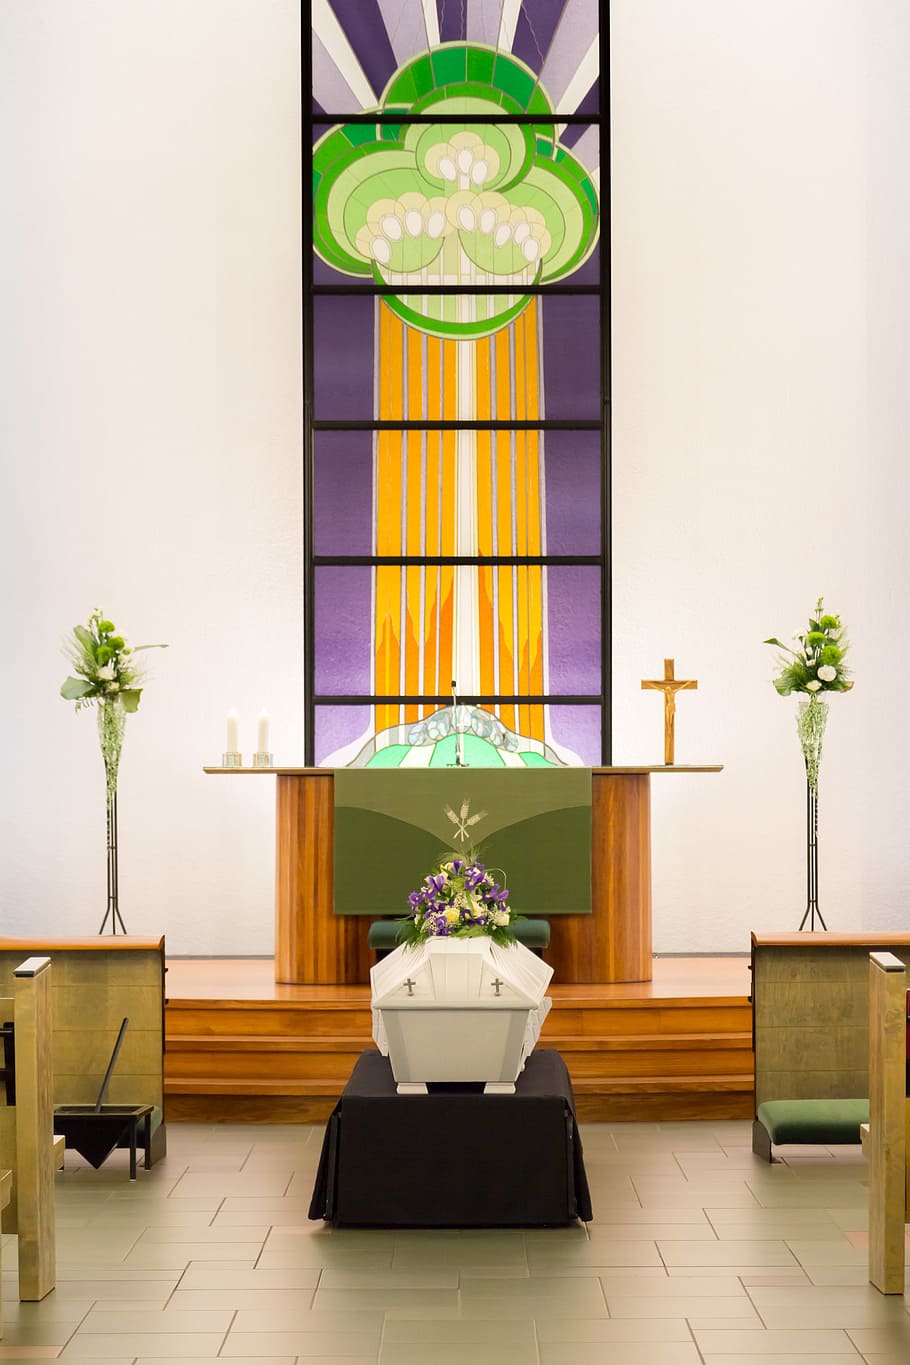 funeral, church, the priest, plant, indoors, flower, flowering plant, potted plant, seat, vase